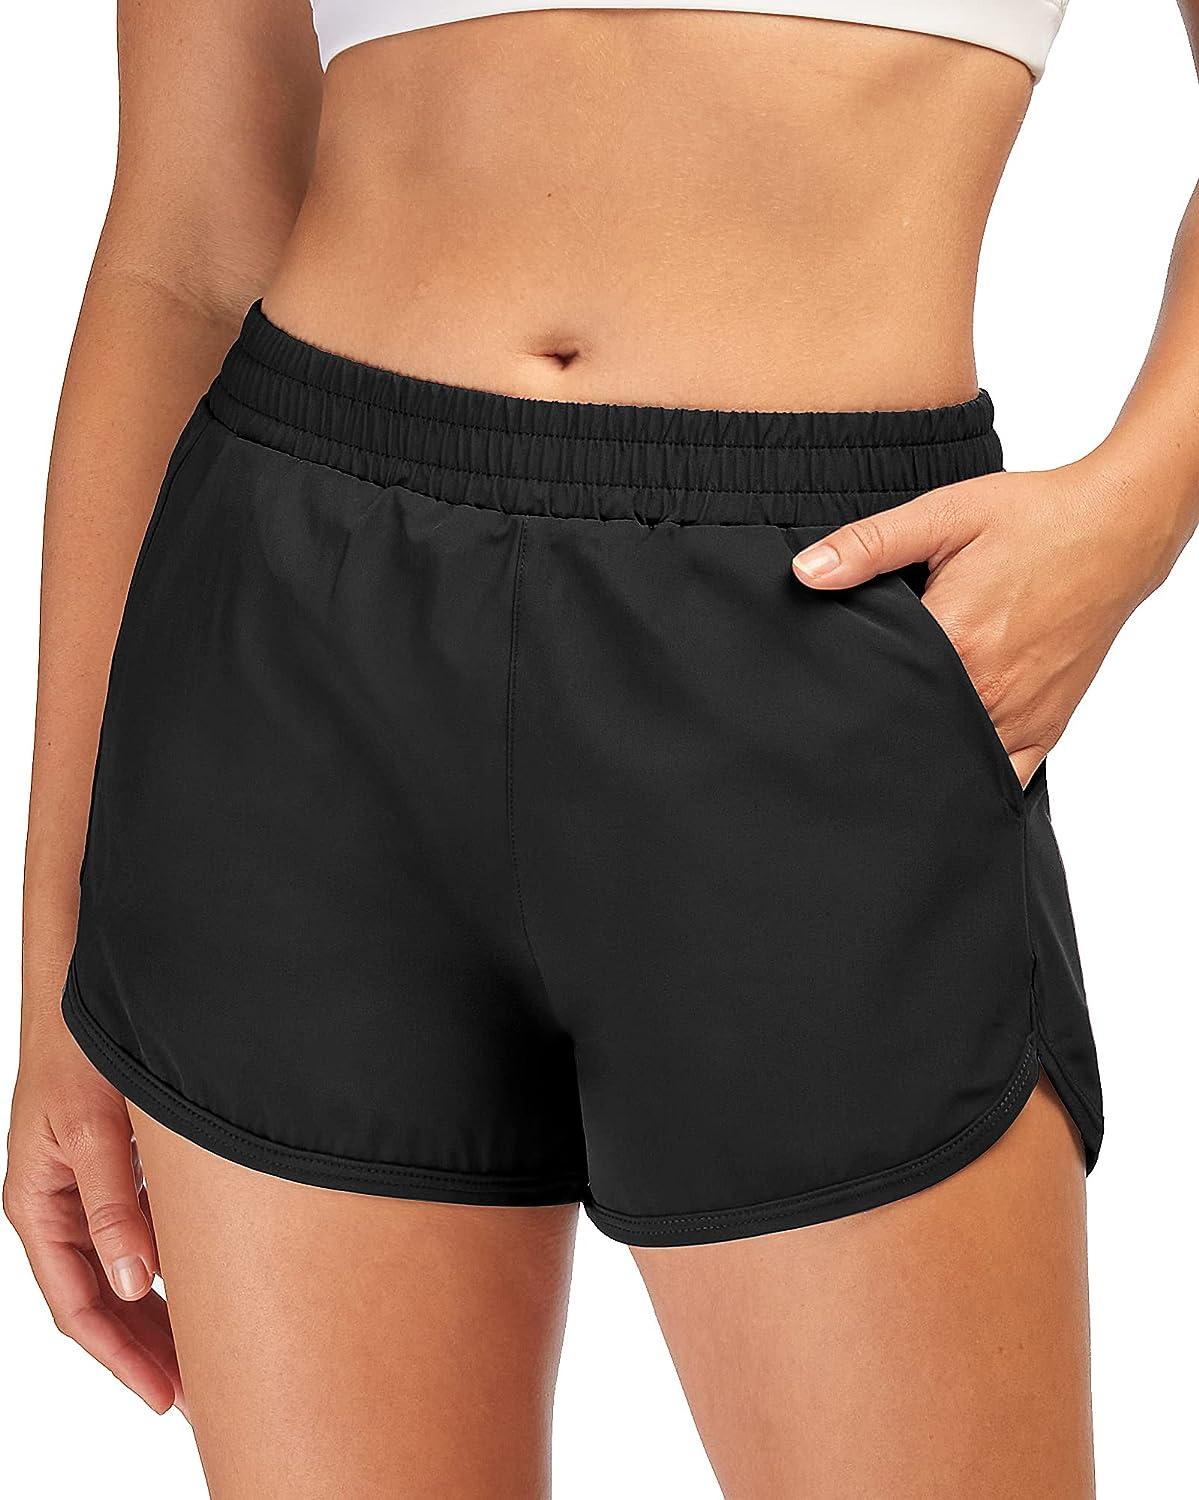 Stelle Women's 3/4/7 Running Shorts High Waisted Athletic Shorts Quick  Dry Workout Shorts with Mesh Liner Deep Pockets 3 Black Medium